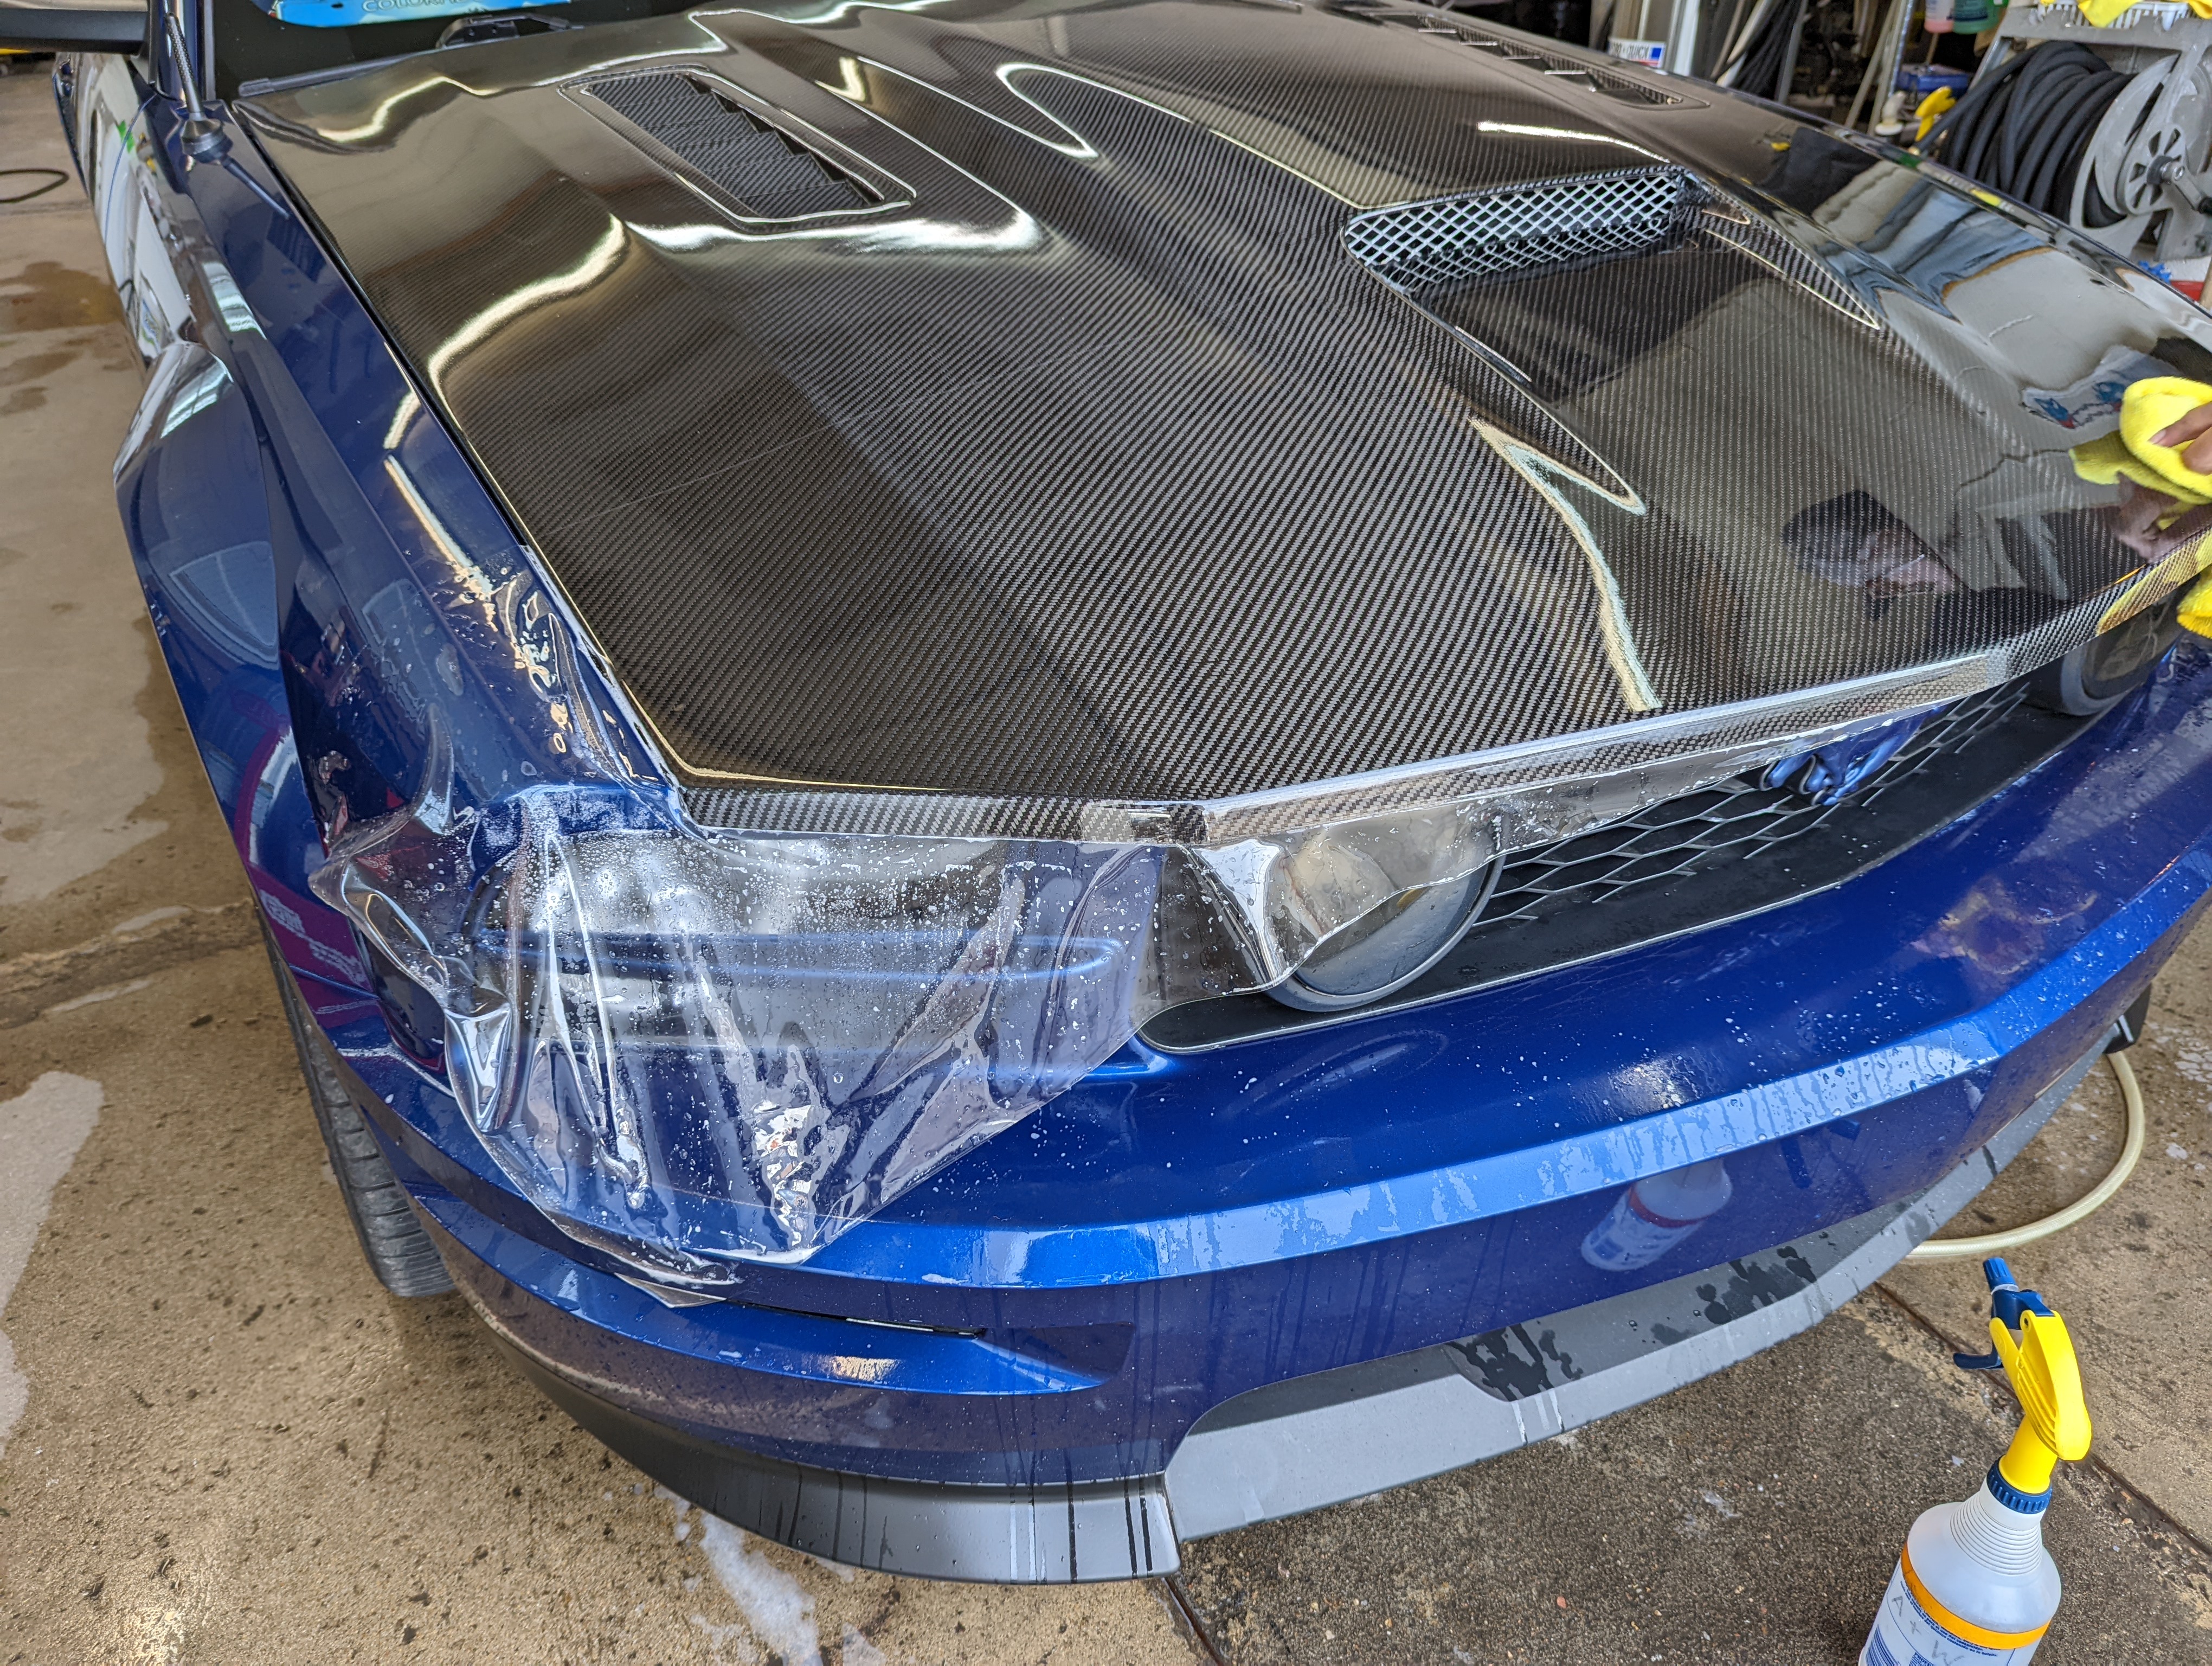 Re-installation of the 18" clear bra on the hood and fenders. We added clear to the "wounded" area to prevent any more de-lamination from happening. No cutting needed to be done on the hood scoop.